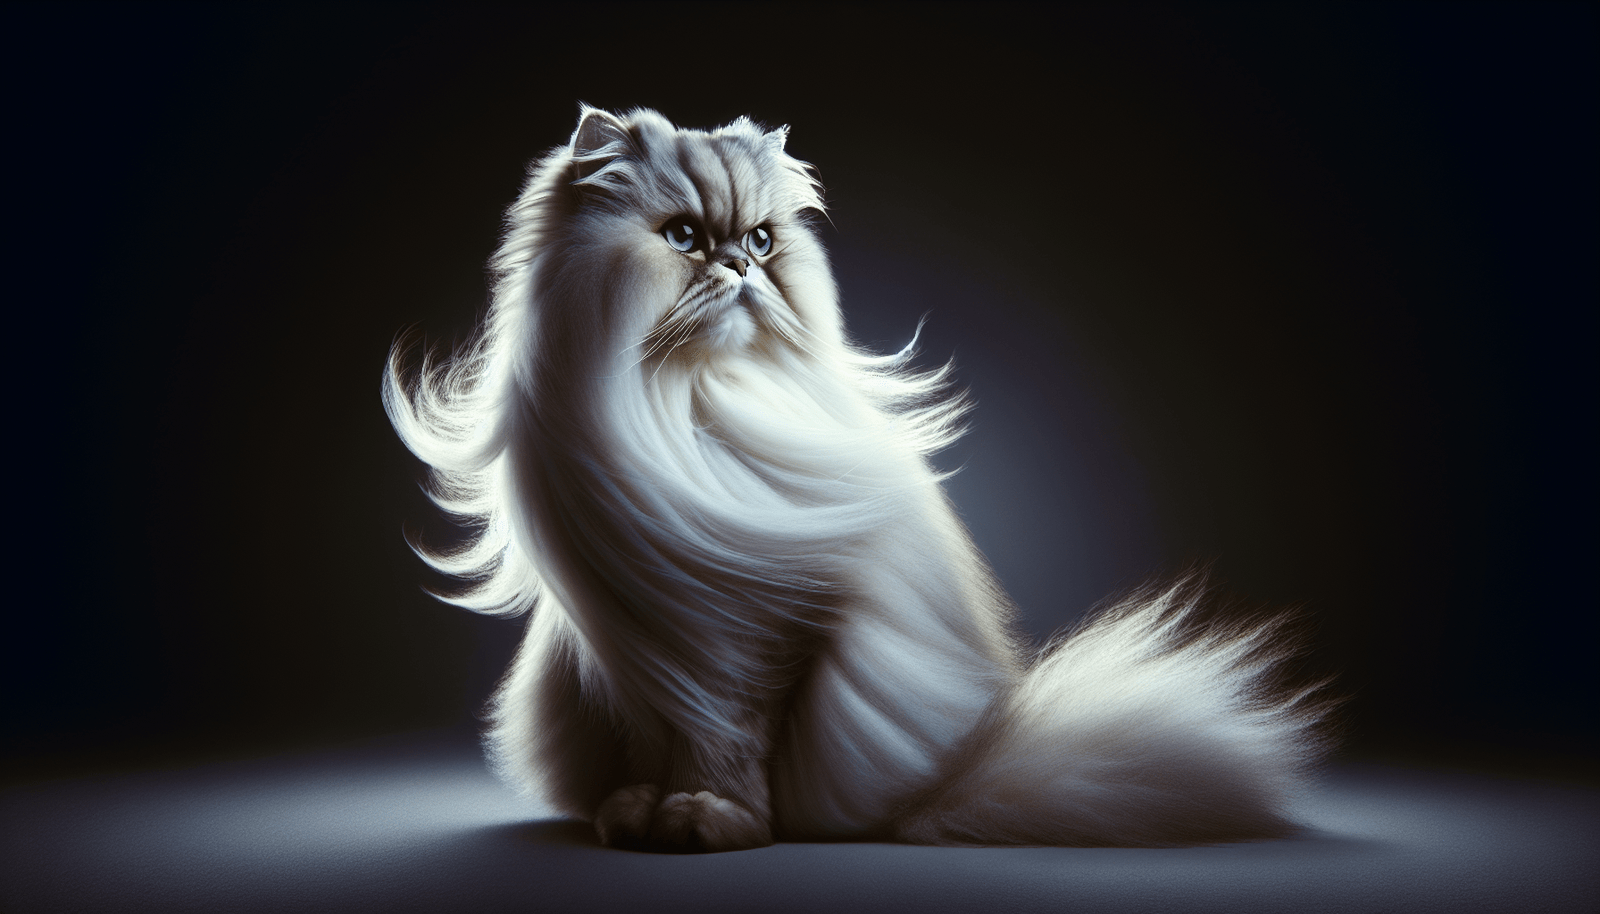 How Long Does a Persian Cat Live?